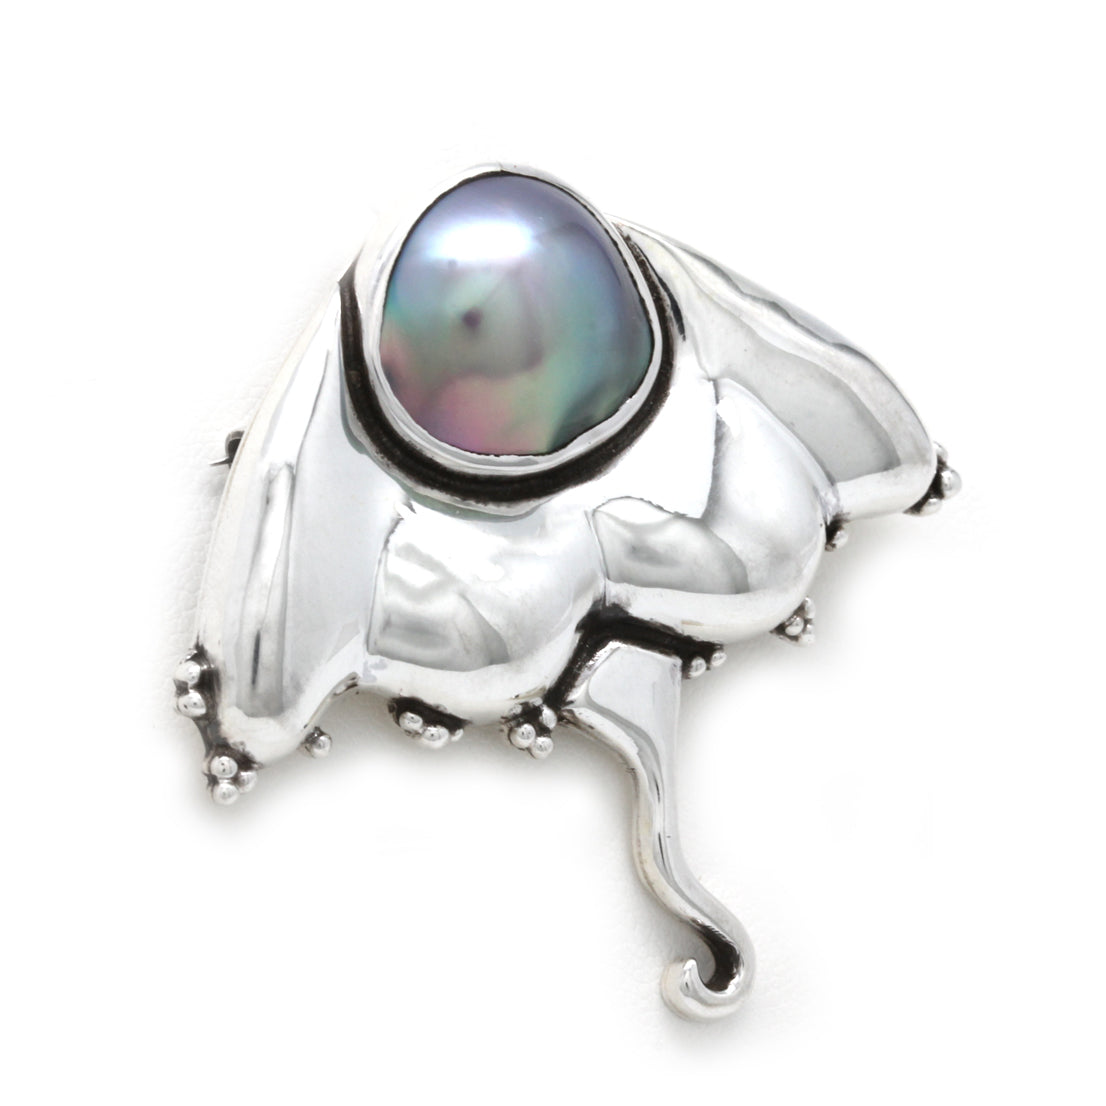 "Stingray" Silver Brooch/Pendant with Cortez Pearl by Priscila Canales